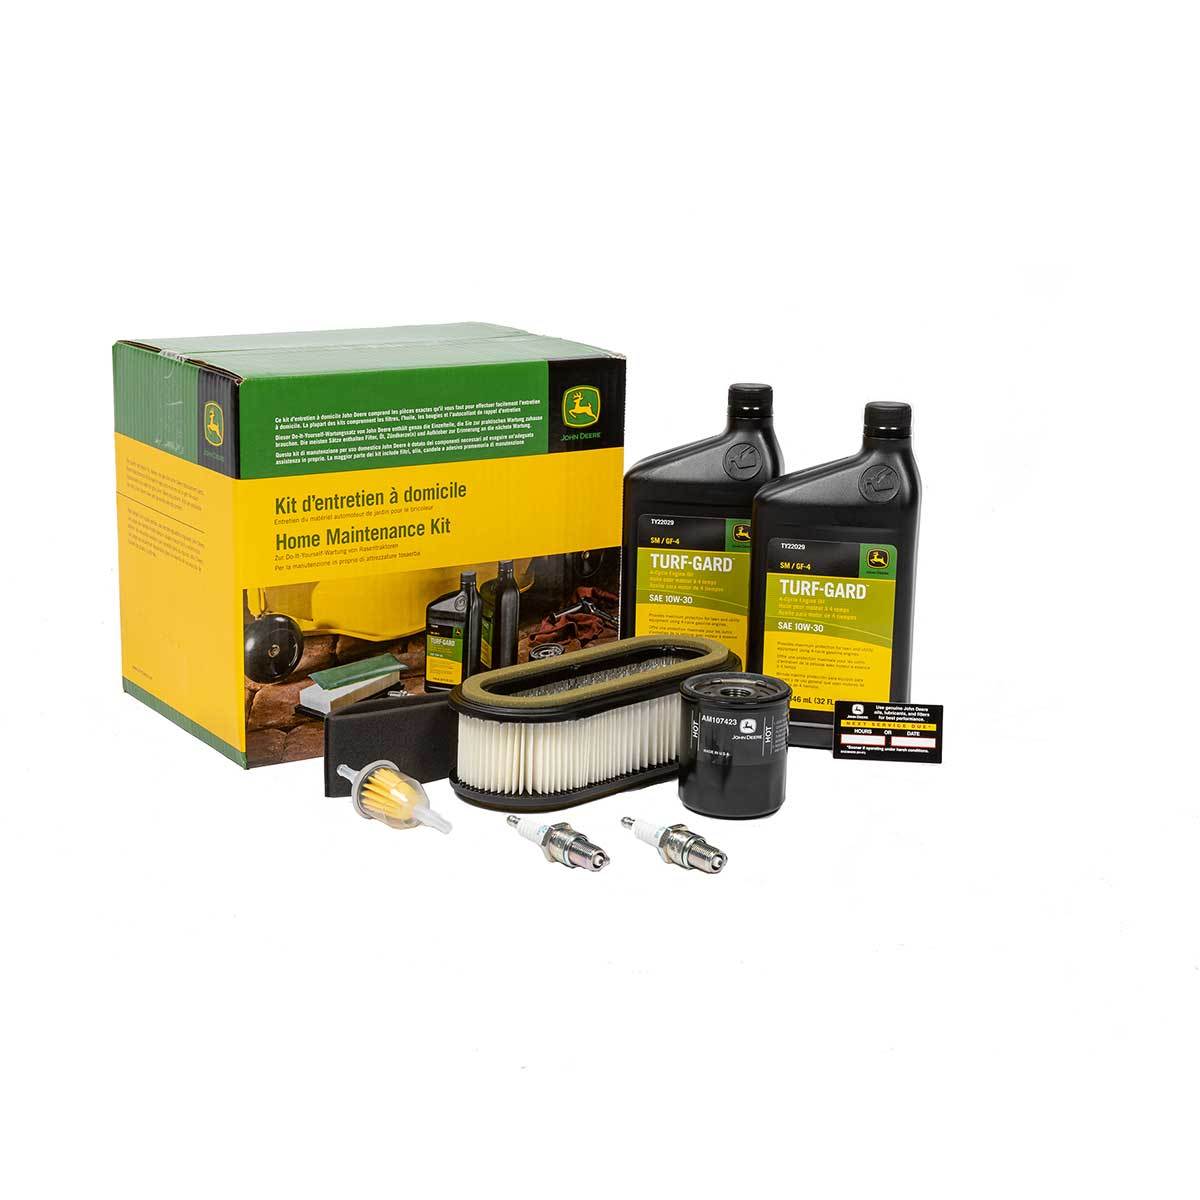 Home Maintenance Kit For 300 and GX Series